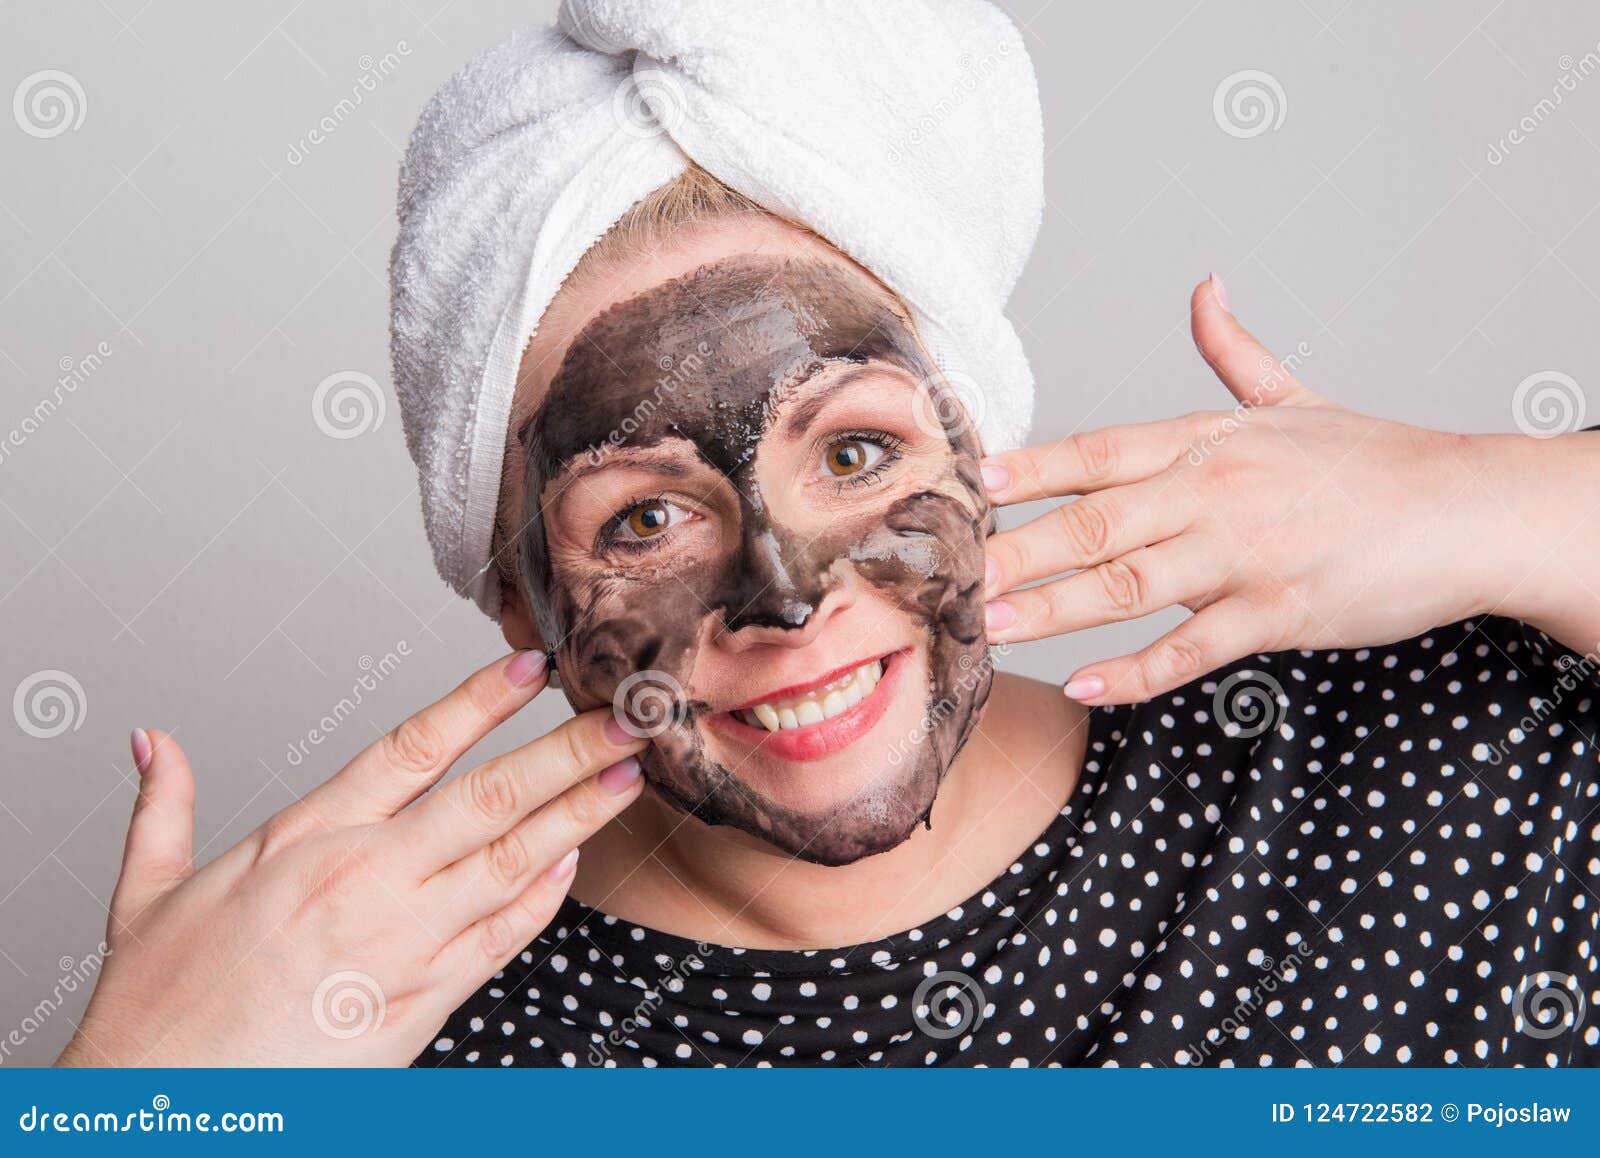 An Attractive Overweight Woman with Black Facial Mask on Her Face in a ...